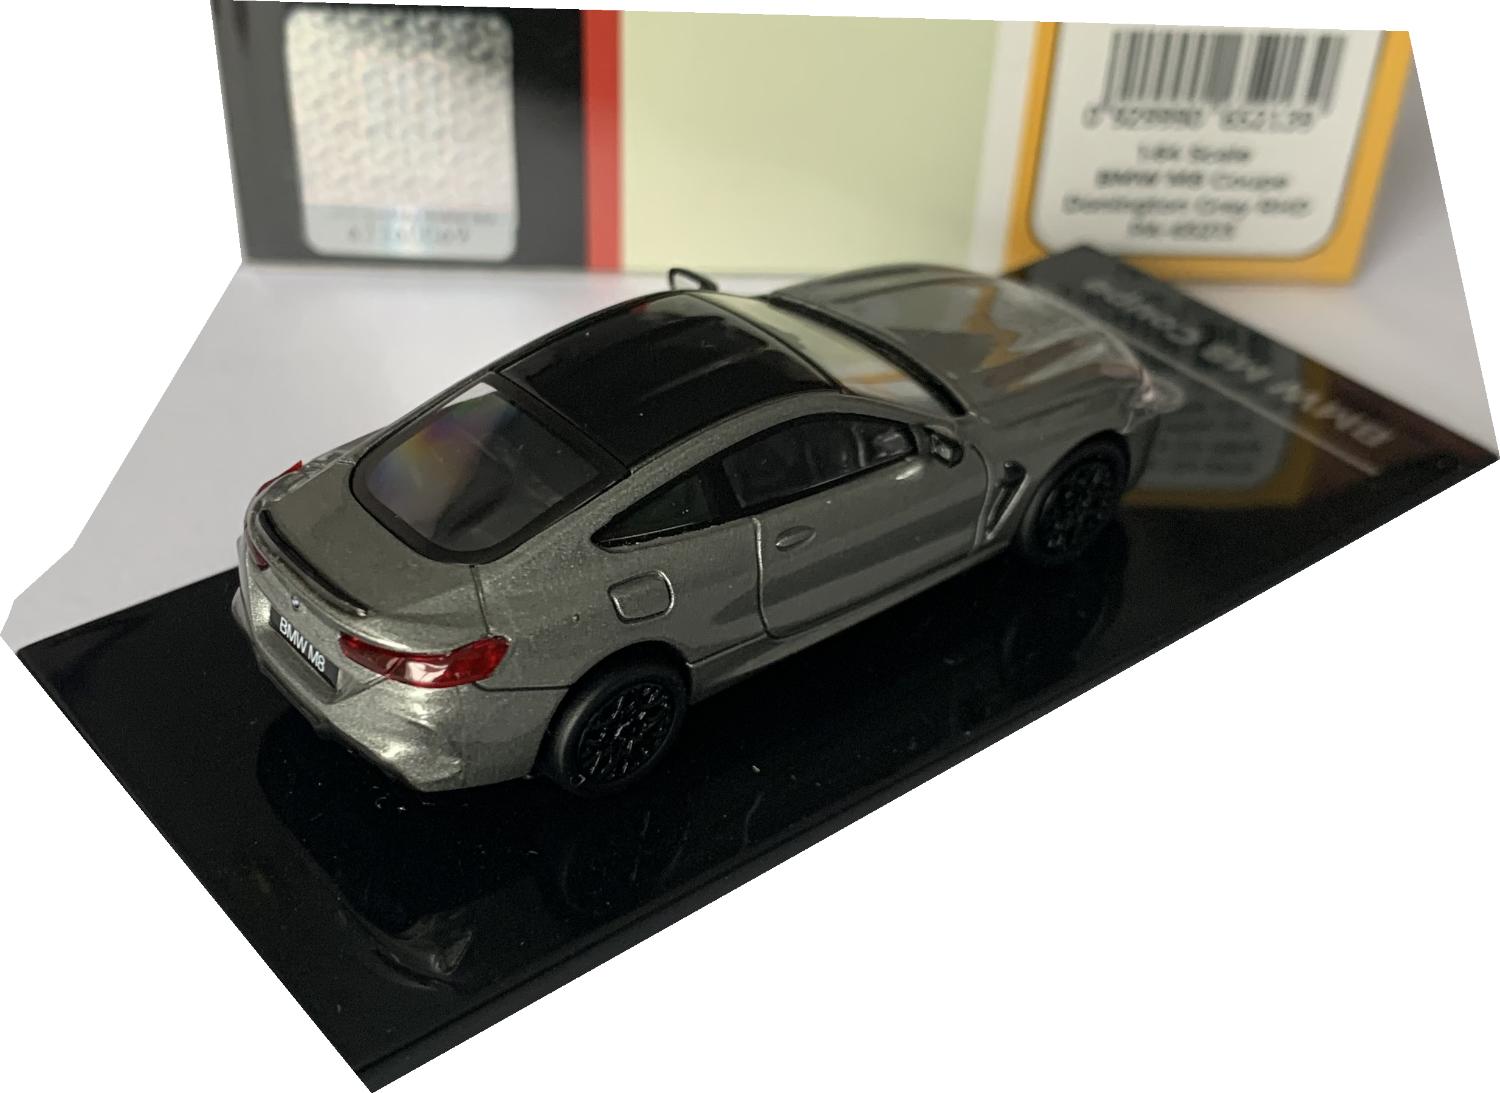 BMW M8 Coupe in donington grey 1:64 scale model from Paragon Models